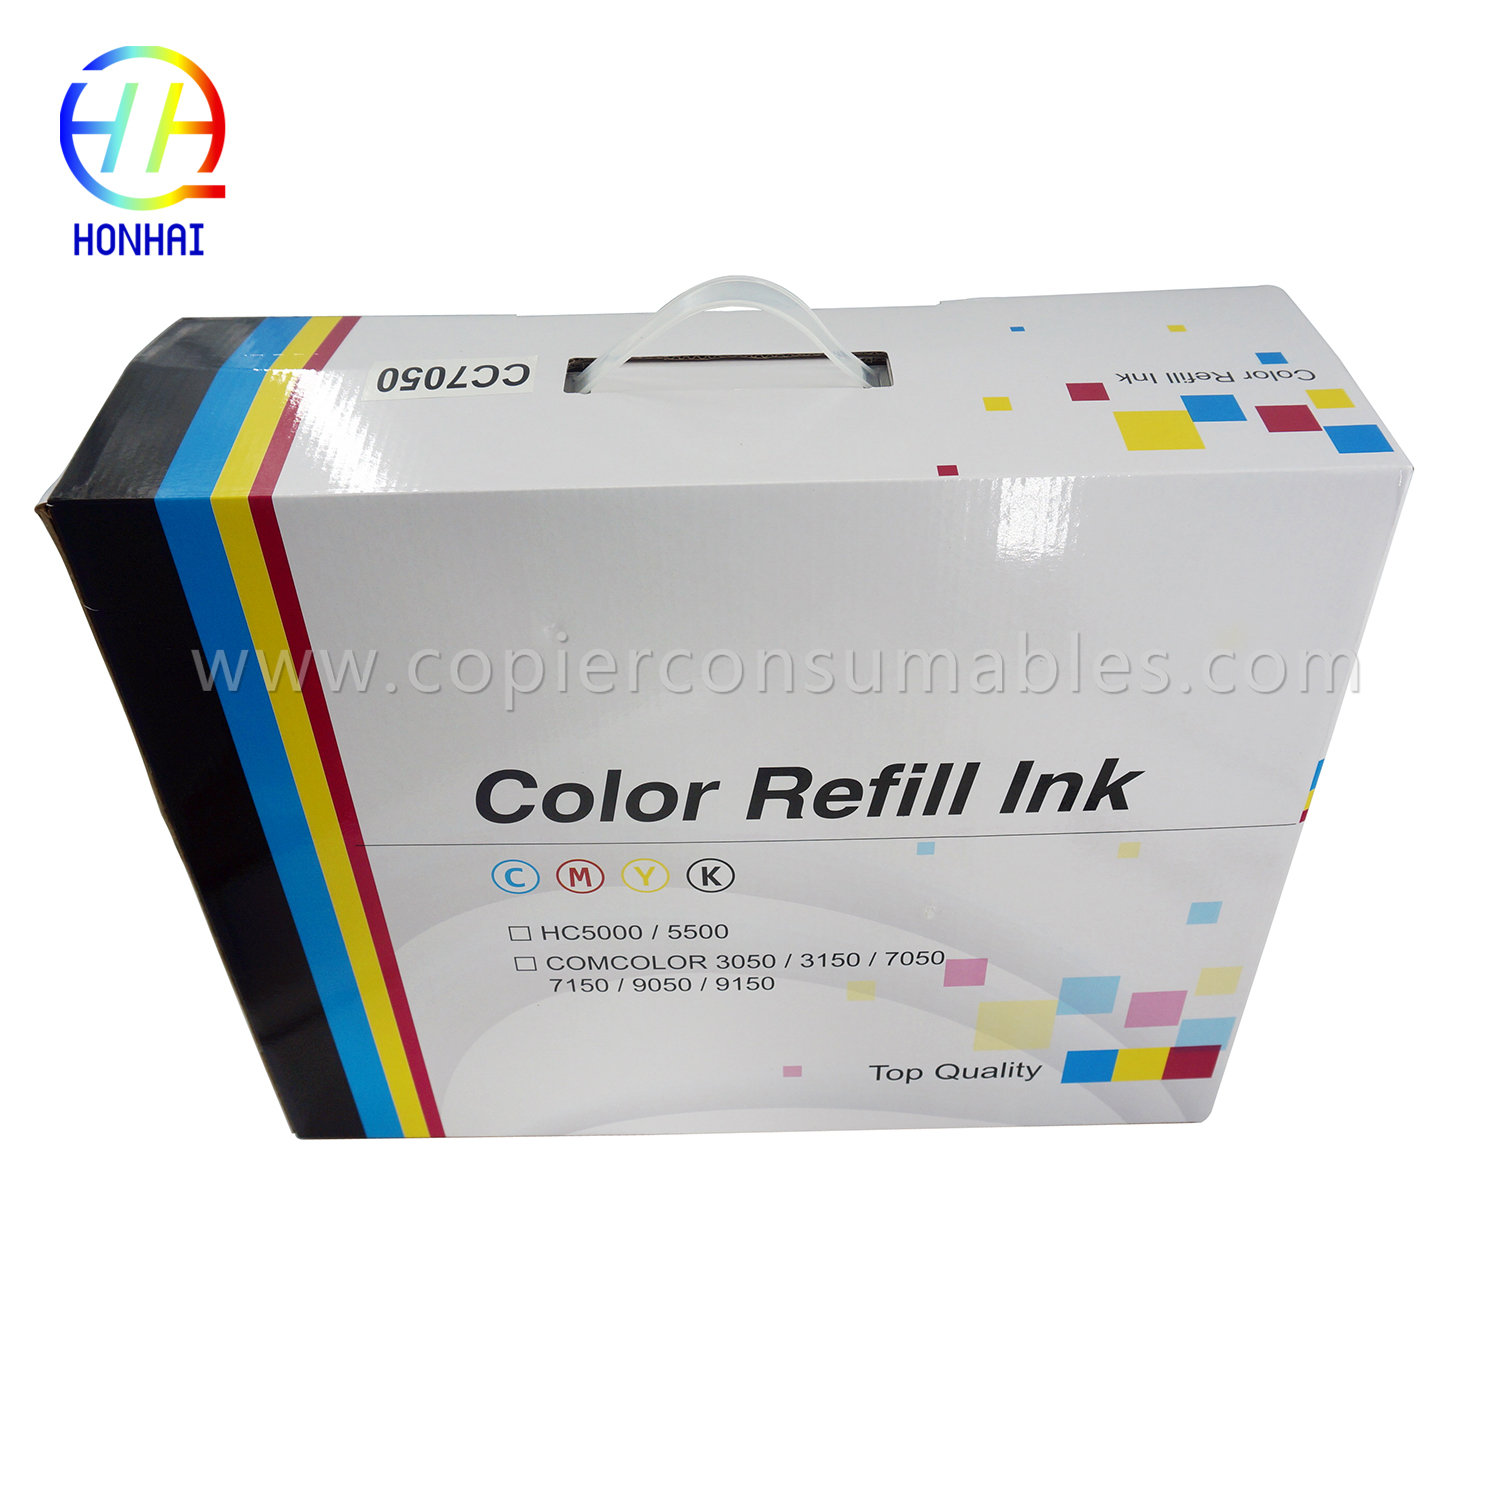 Kartrid Tinta Risograph ComColor 3010 3050 3150 7010 7050 7150 9050 9150 HC 5000 5500 (S-6300G S-6301G S-6302G S-6303G) (1)